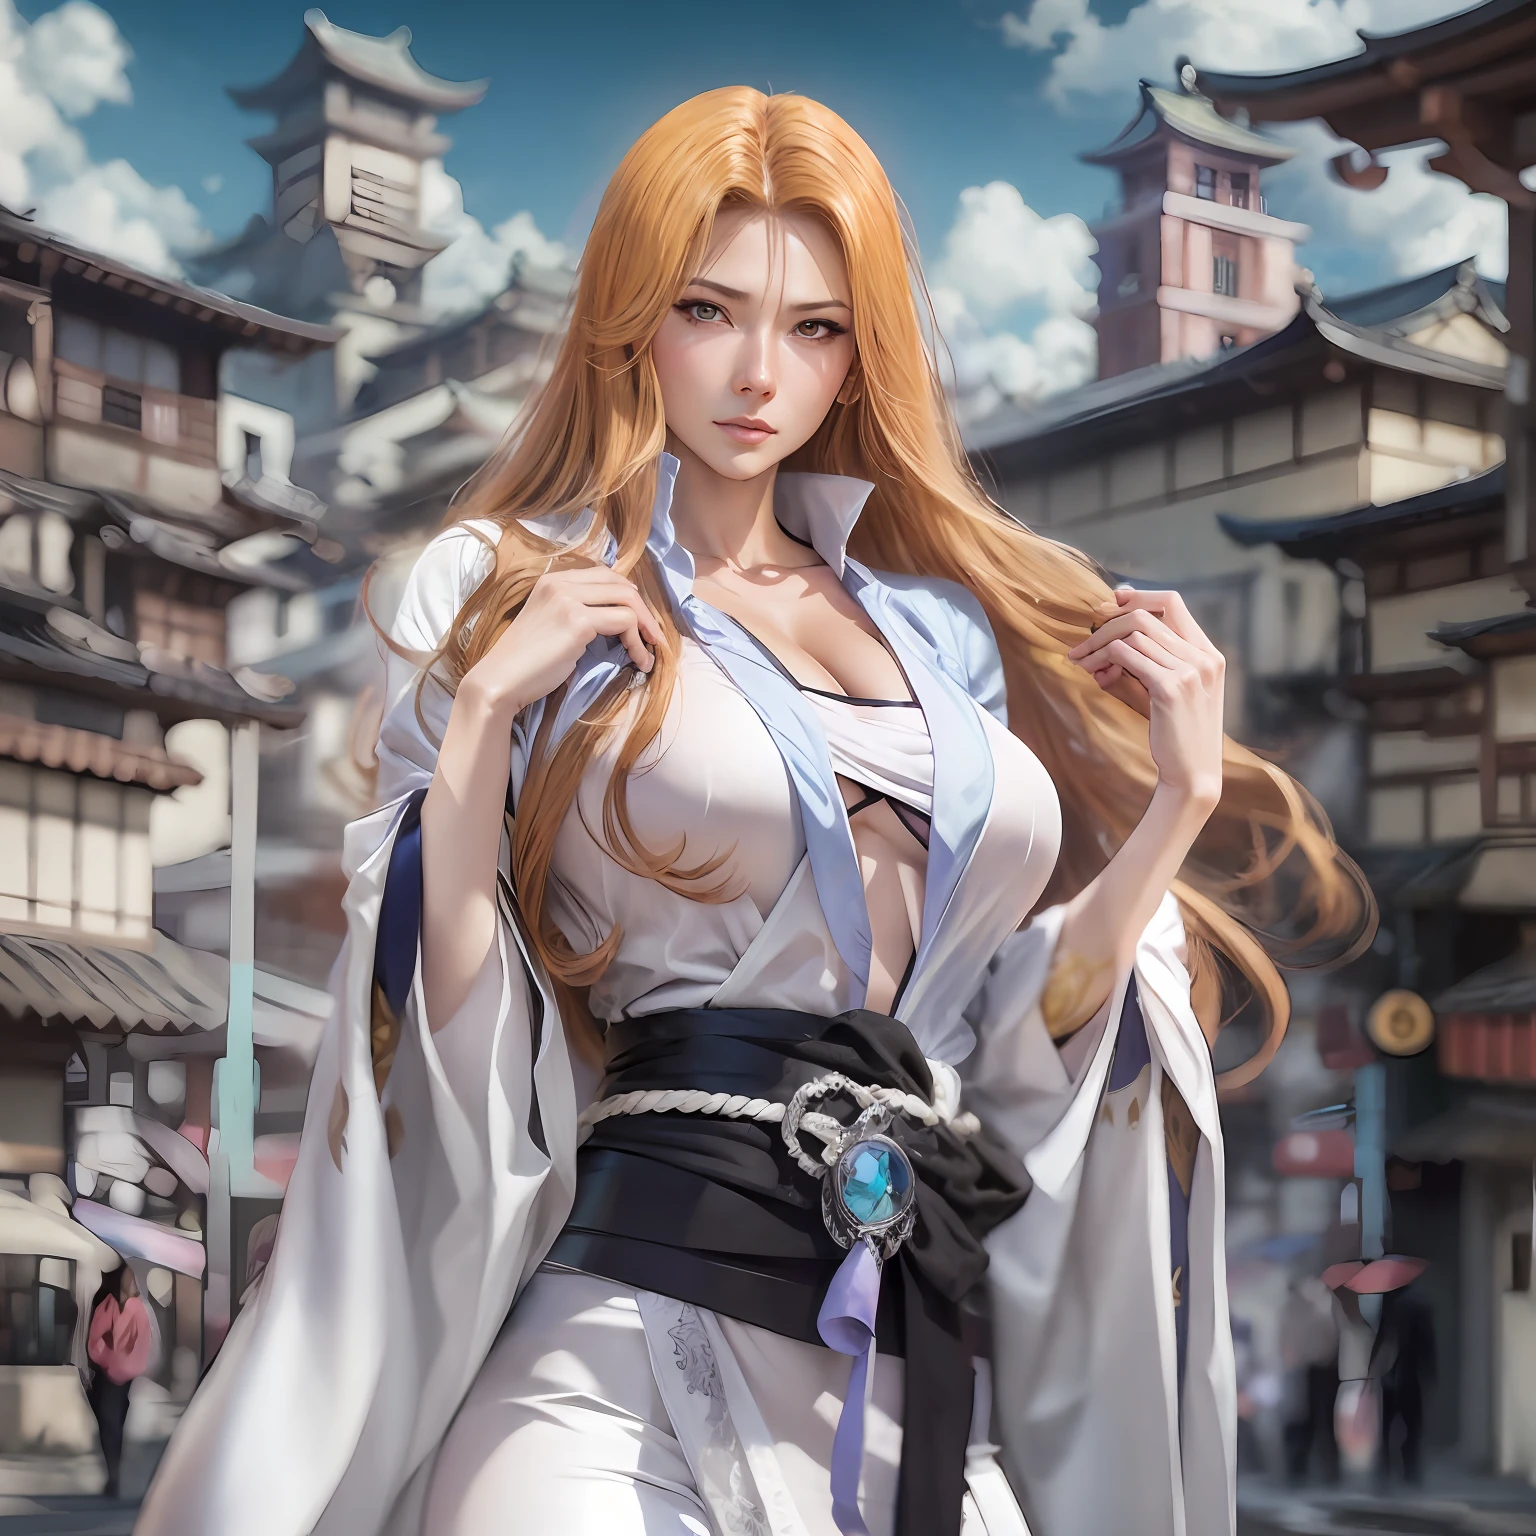 A Rangiku Matsumoto from Bleach Masterpiece, Perfect Body, Perfect Face, Perfect Detailed Eyes, Perfect hands, In the middle of a medieval Japanese City, detailed and intrincicated, HD, photoshoot